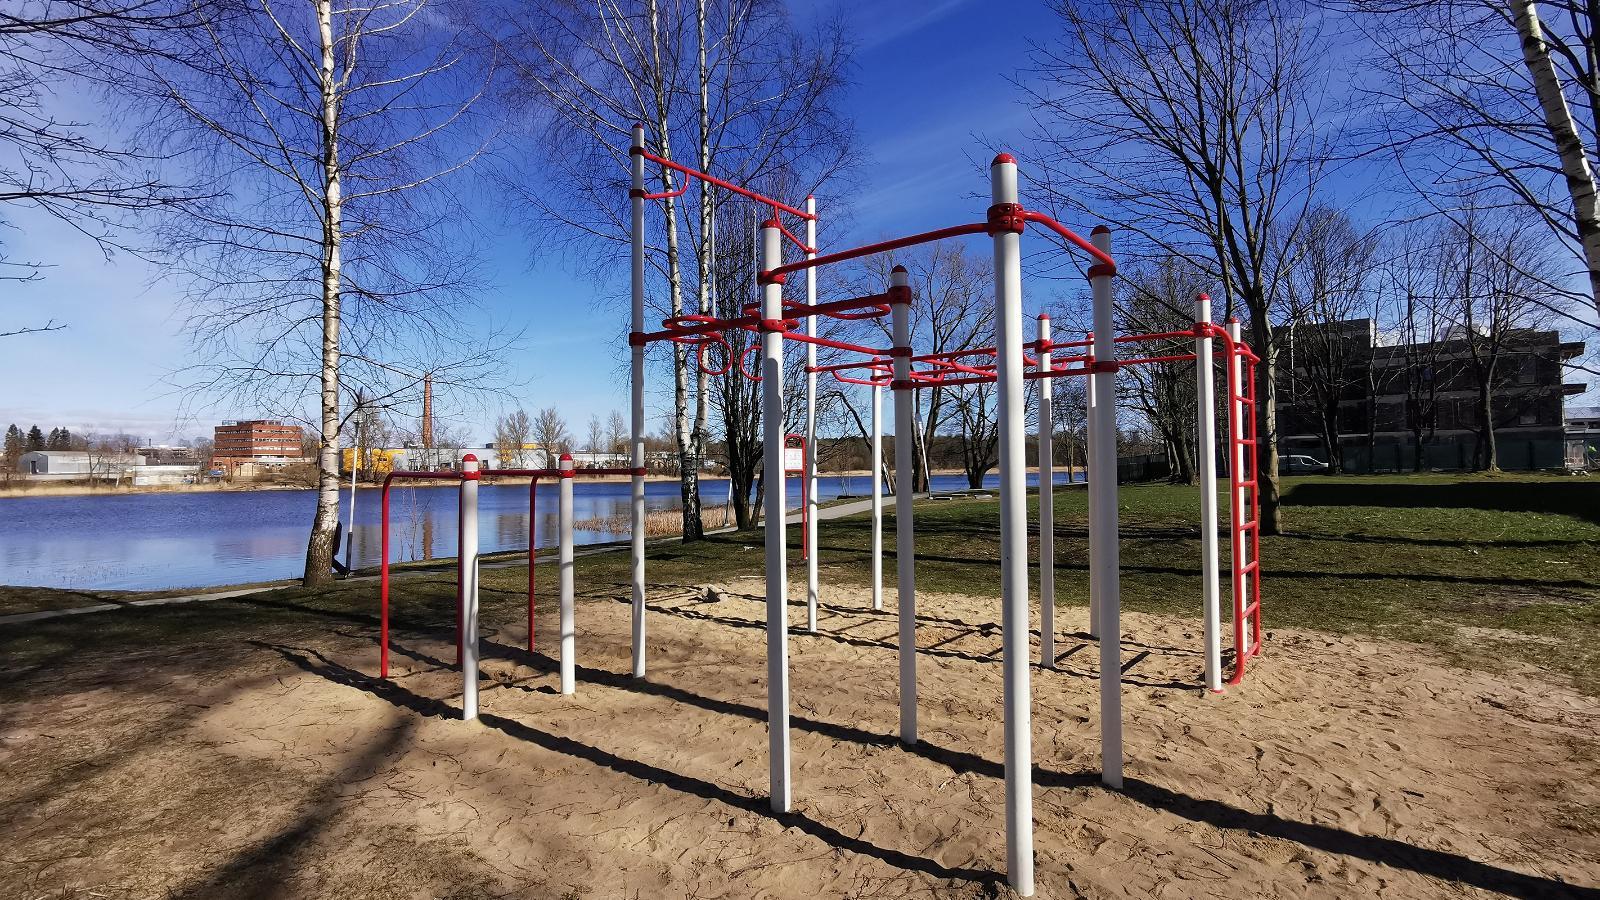 Jaanson’s Track outdoor gym